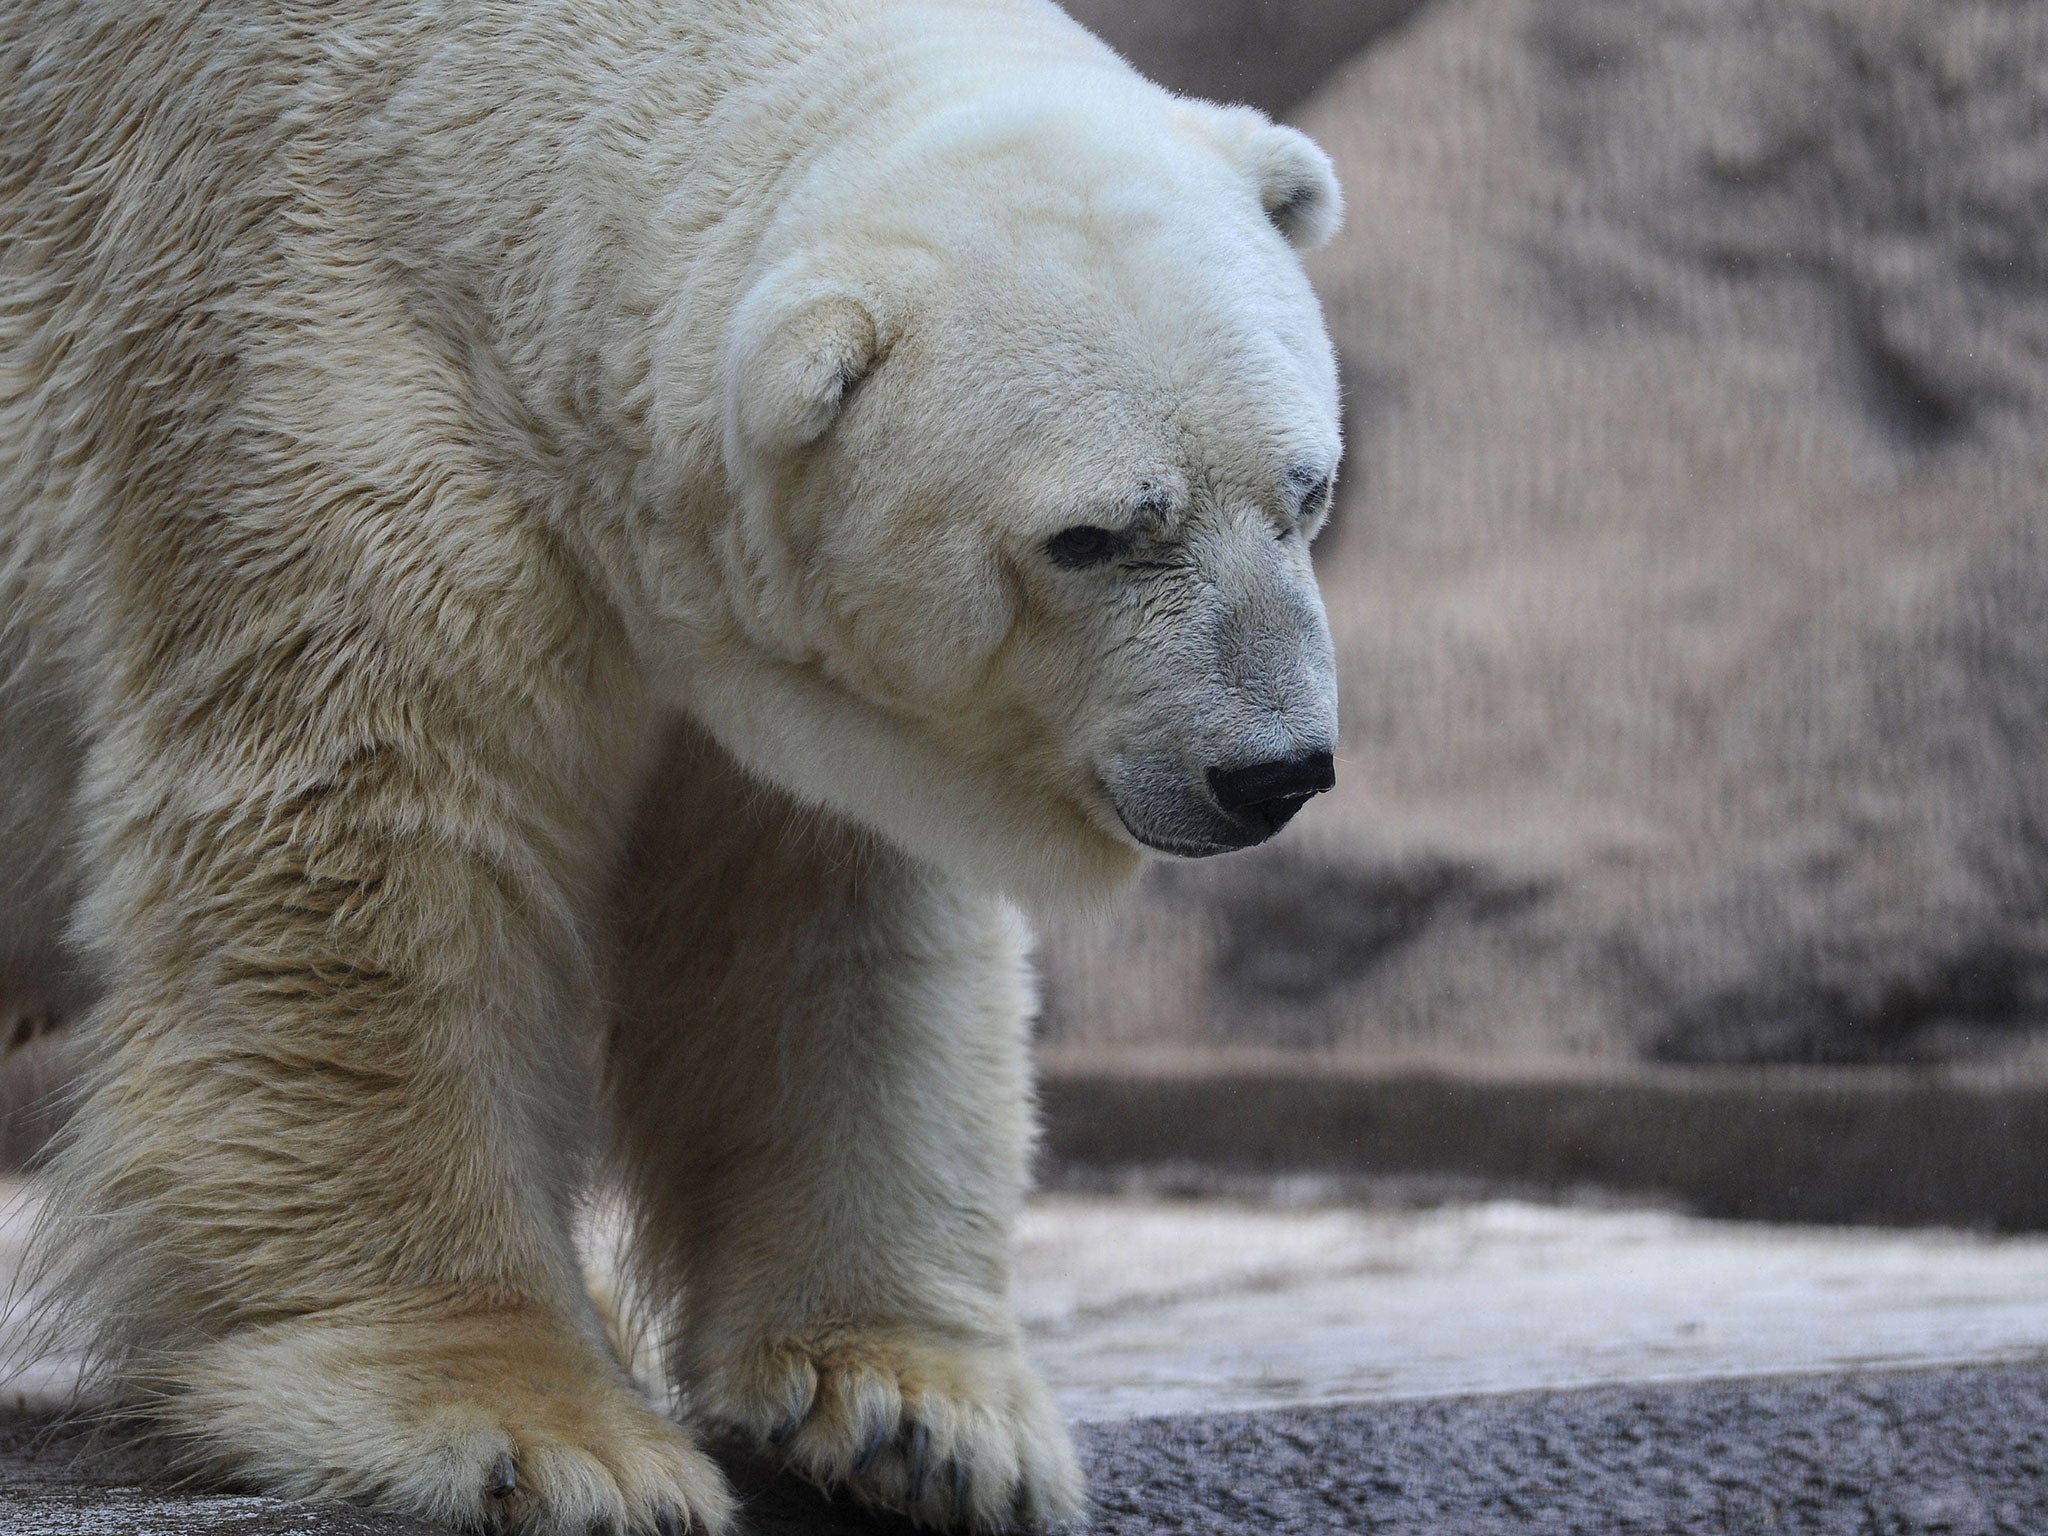 Arturo has been called "the world's saddest animal" after having to live in the boiling concrete enclosure for two decades